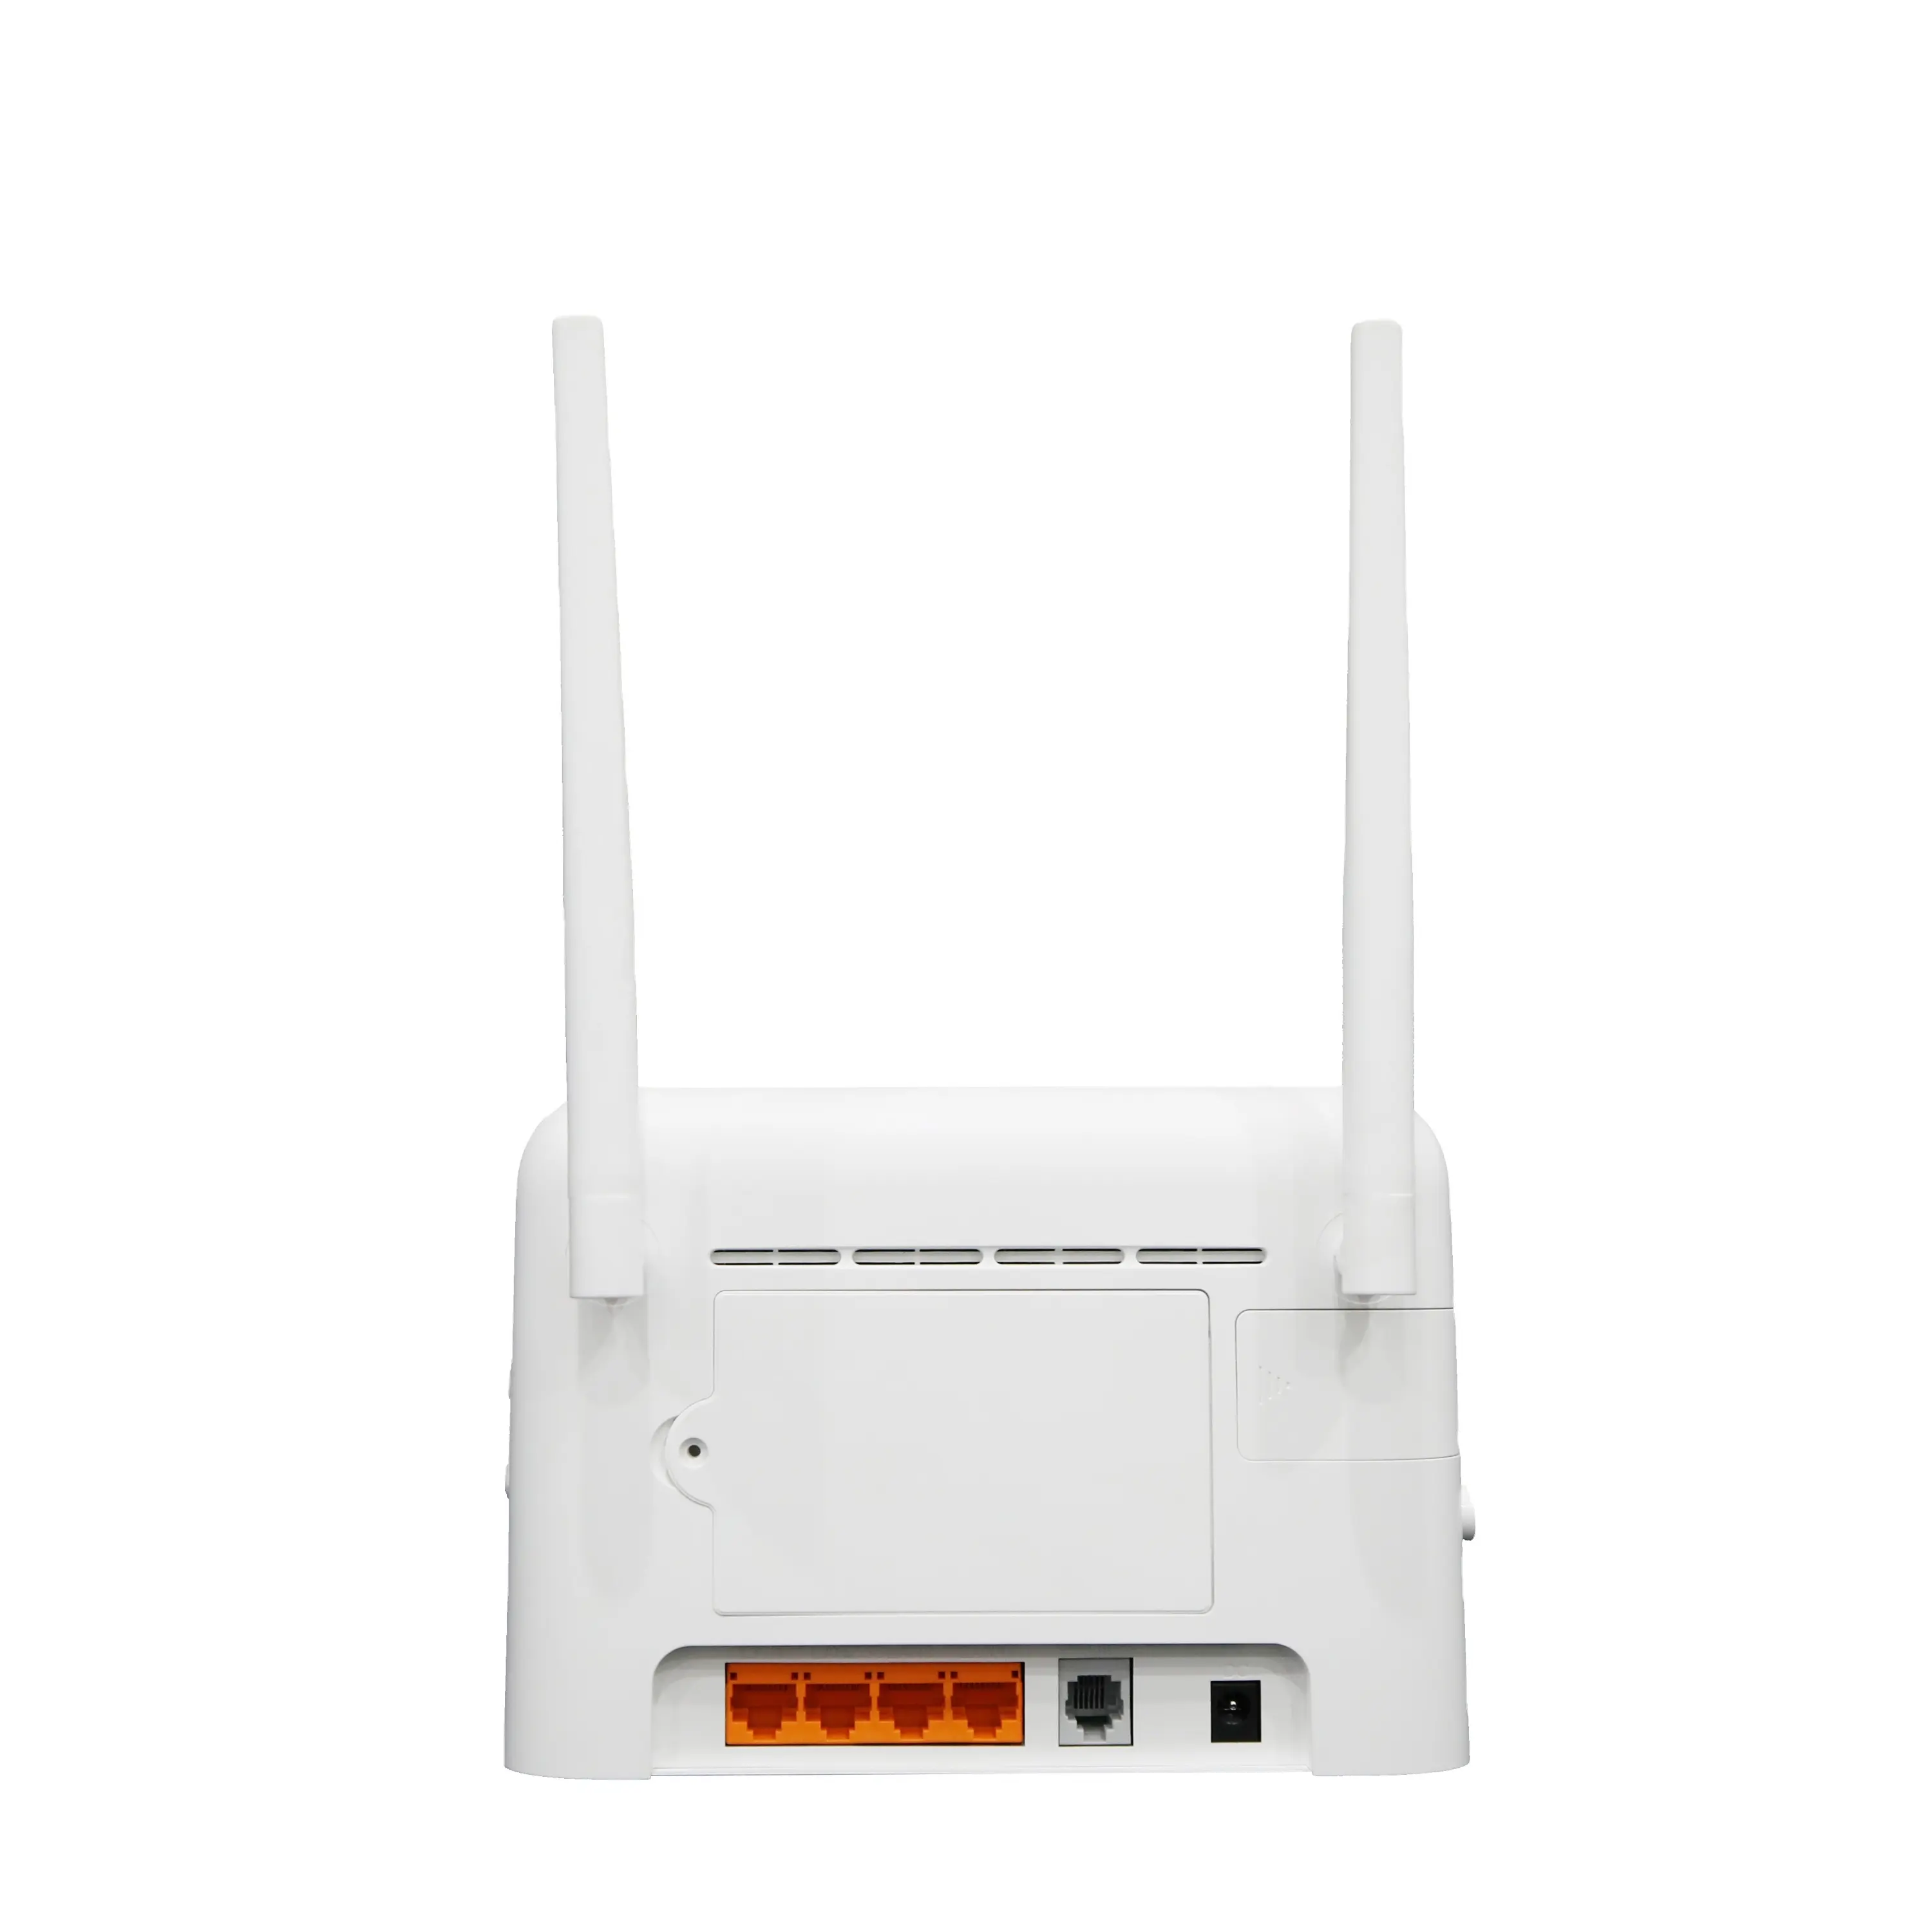 SDK/API 4g lte router with sim card slot China factory IP04488 (4G product) router wifi wireless